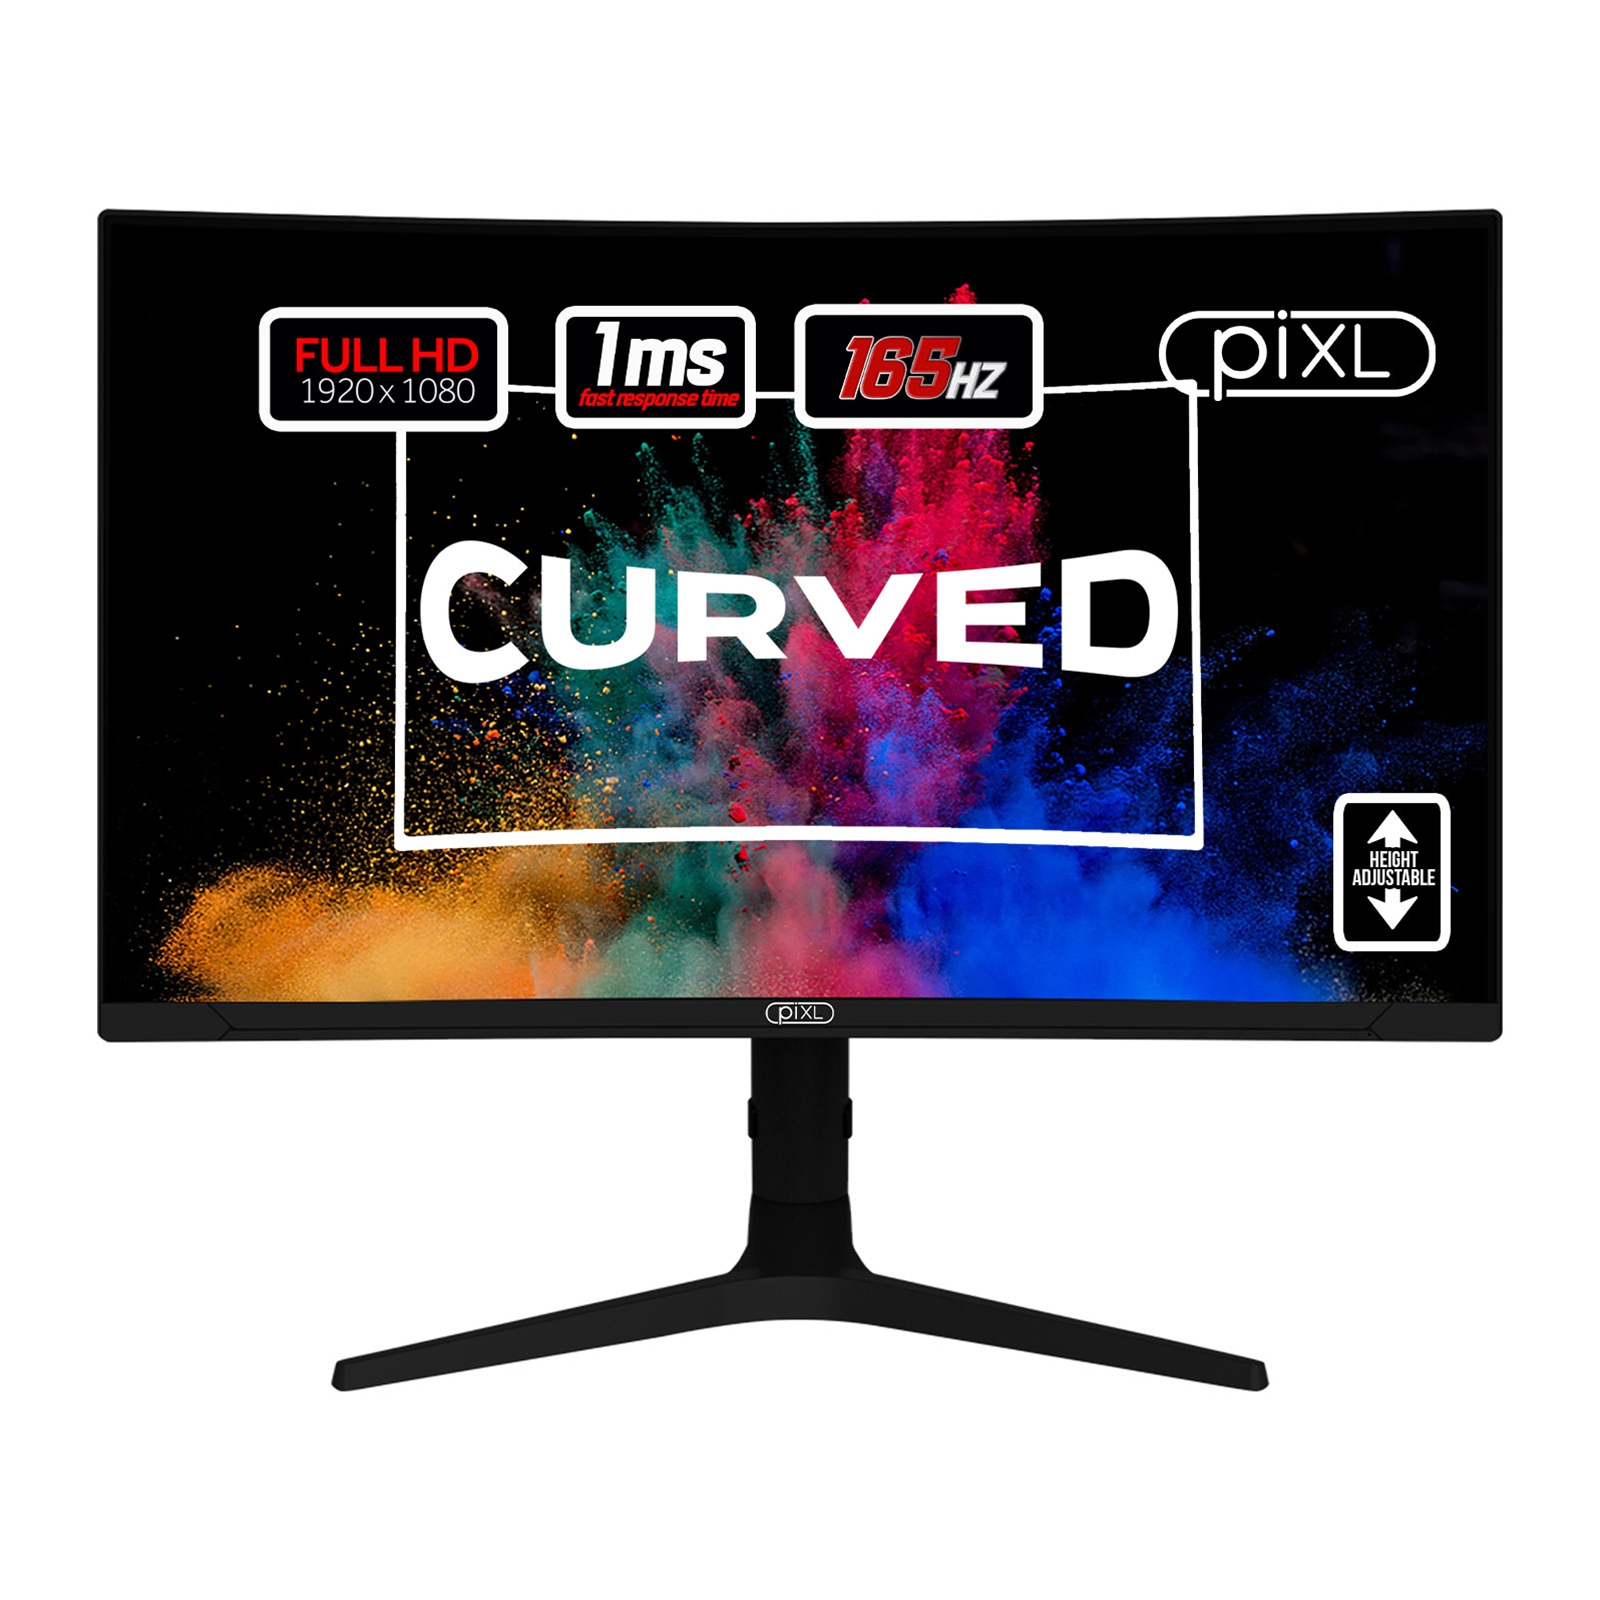 27" curved gaming screen